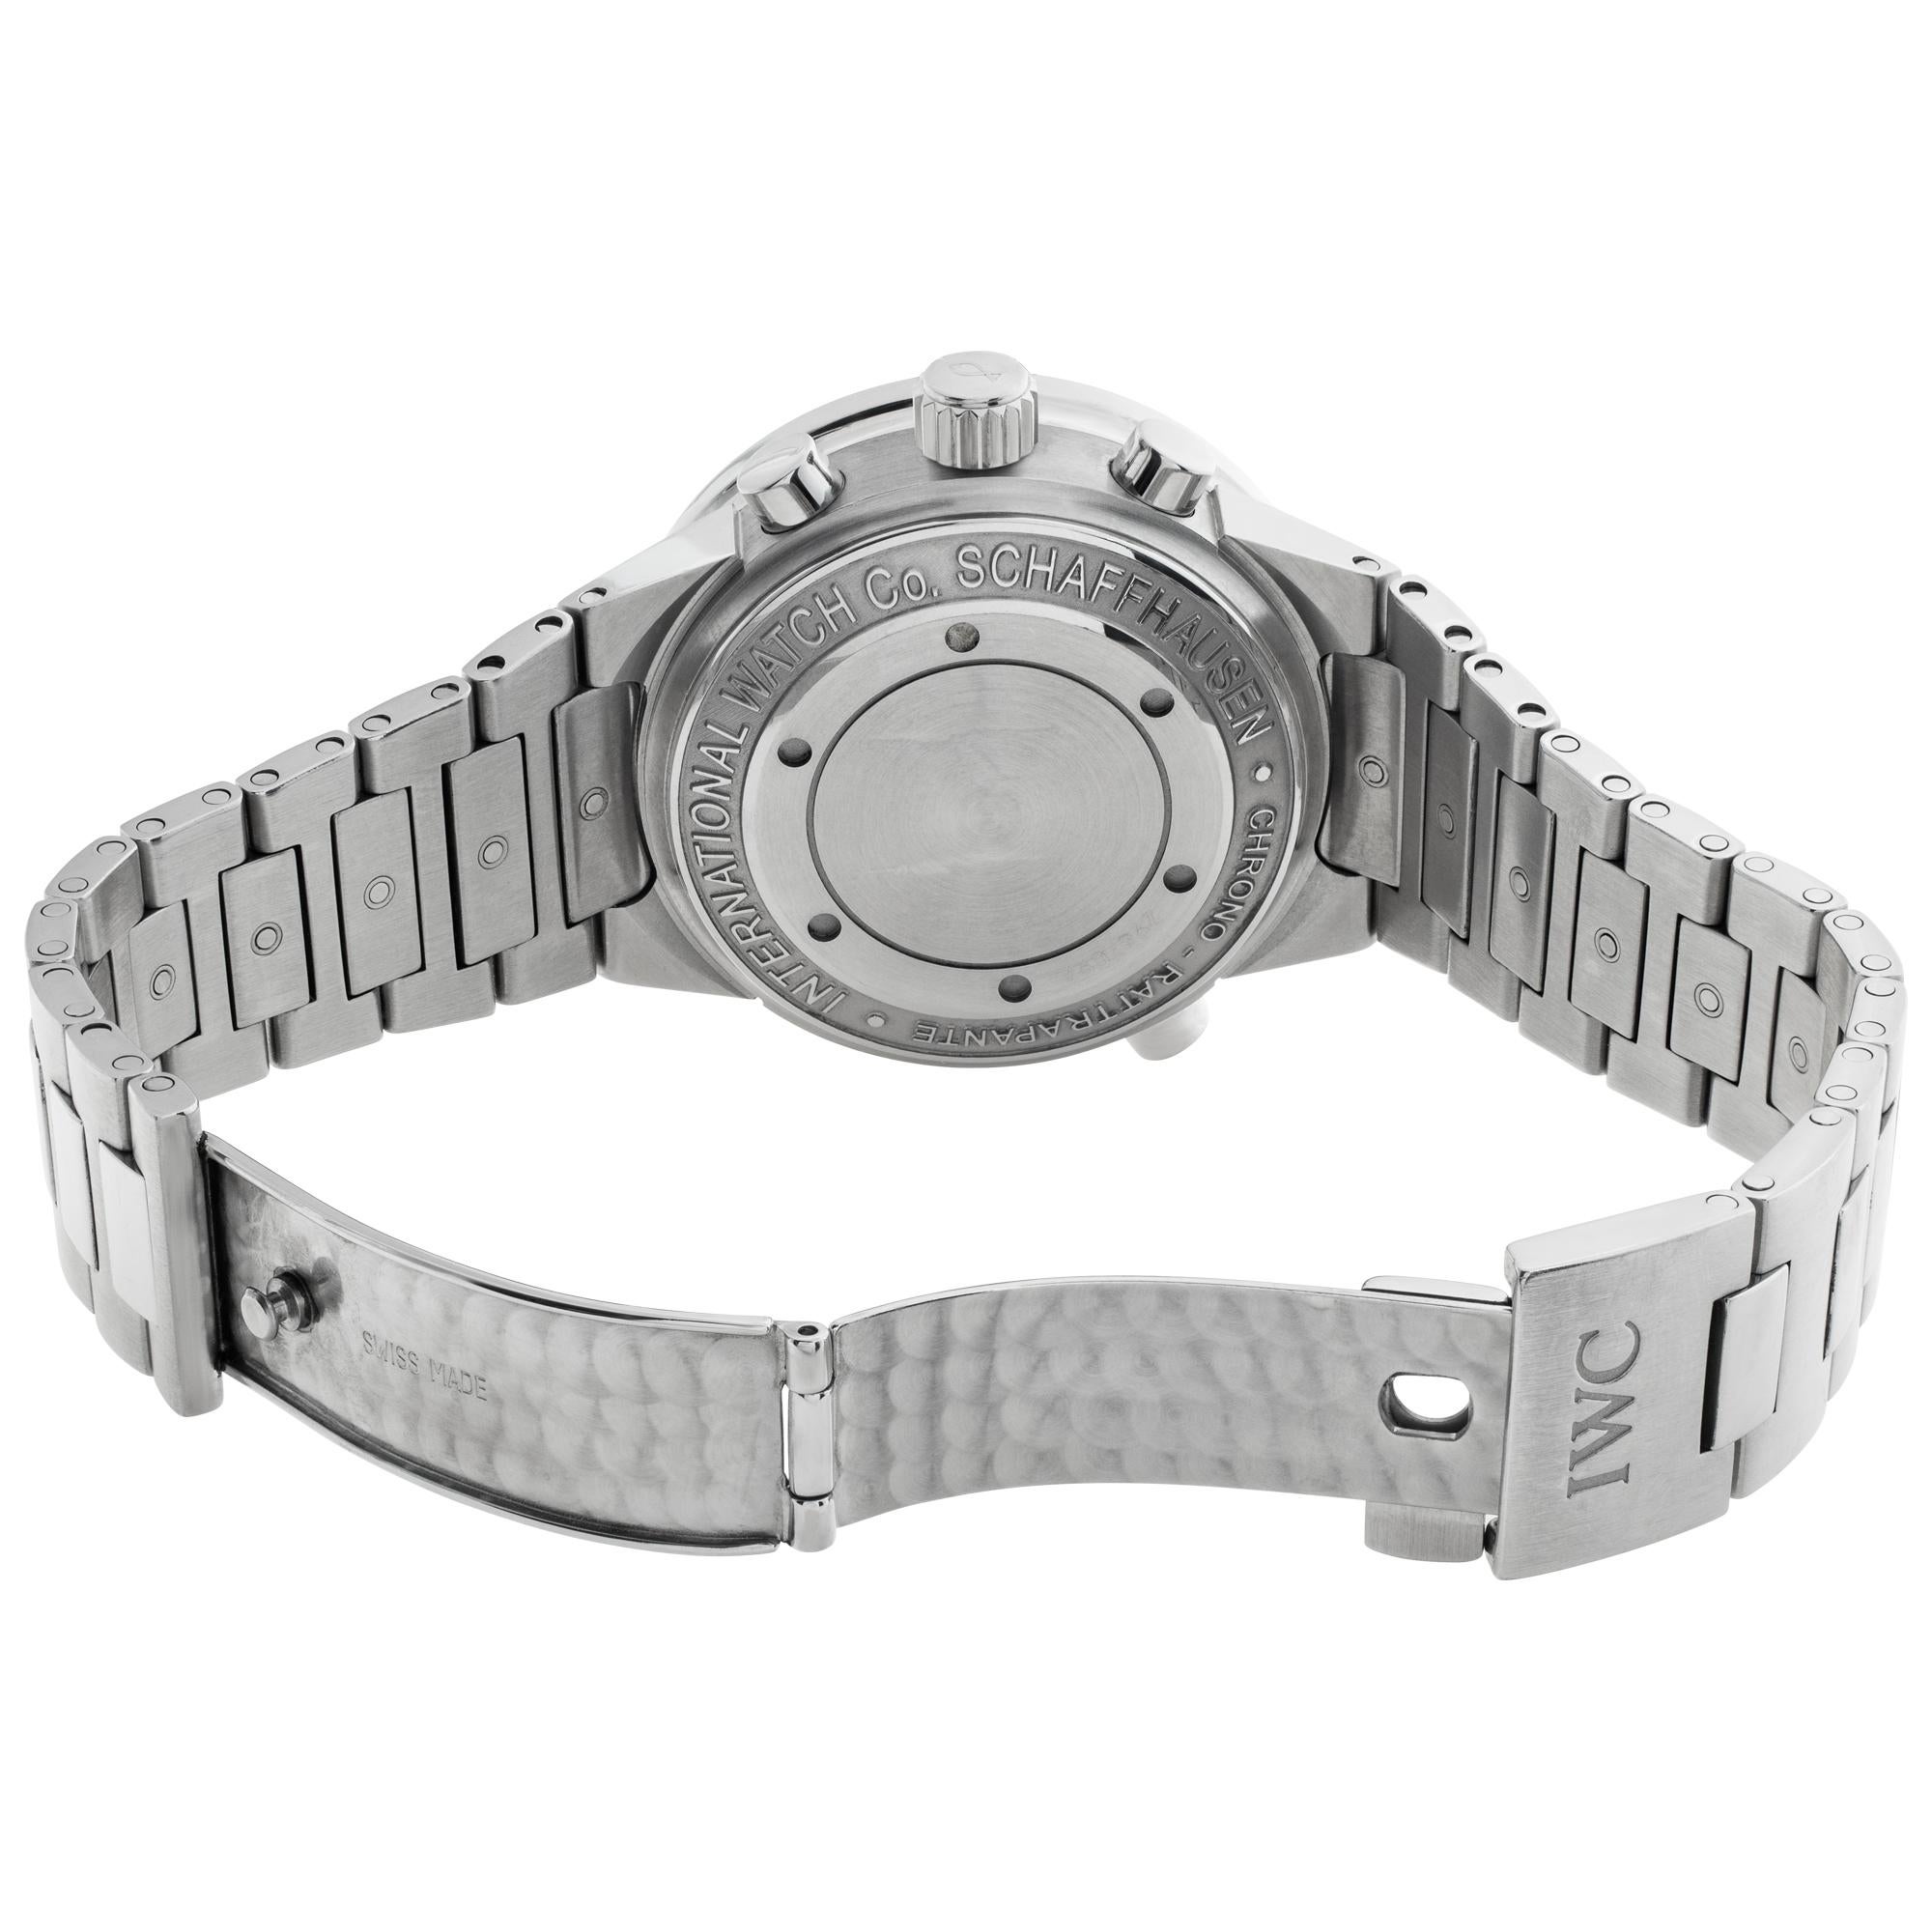 Men's IWC Gst stainless steel Automatic Wristwatch Ref IW3715-23 For Sale